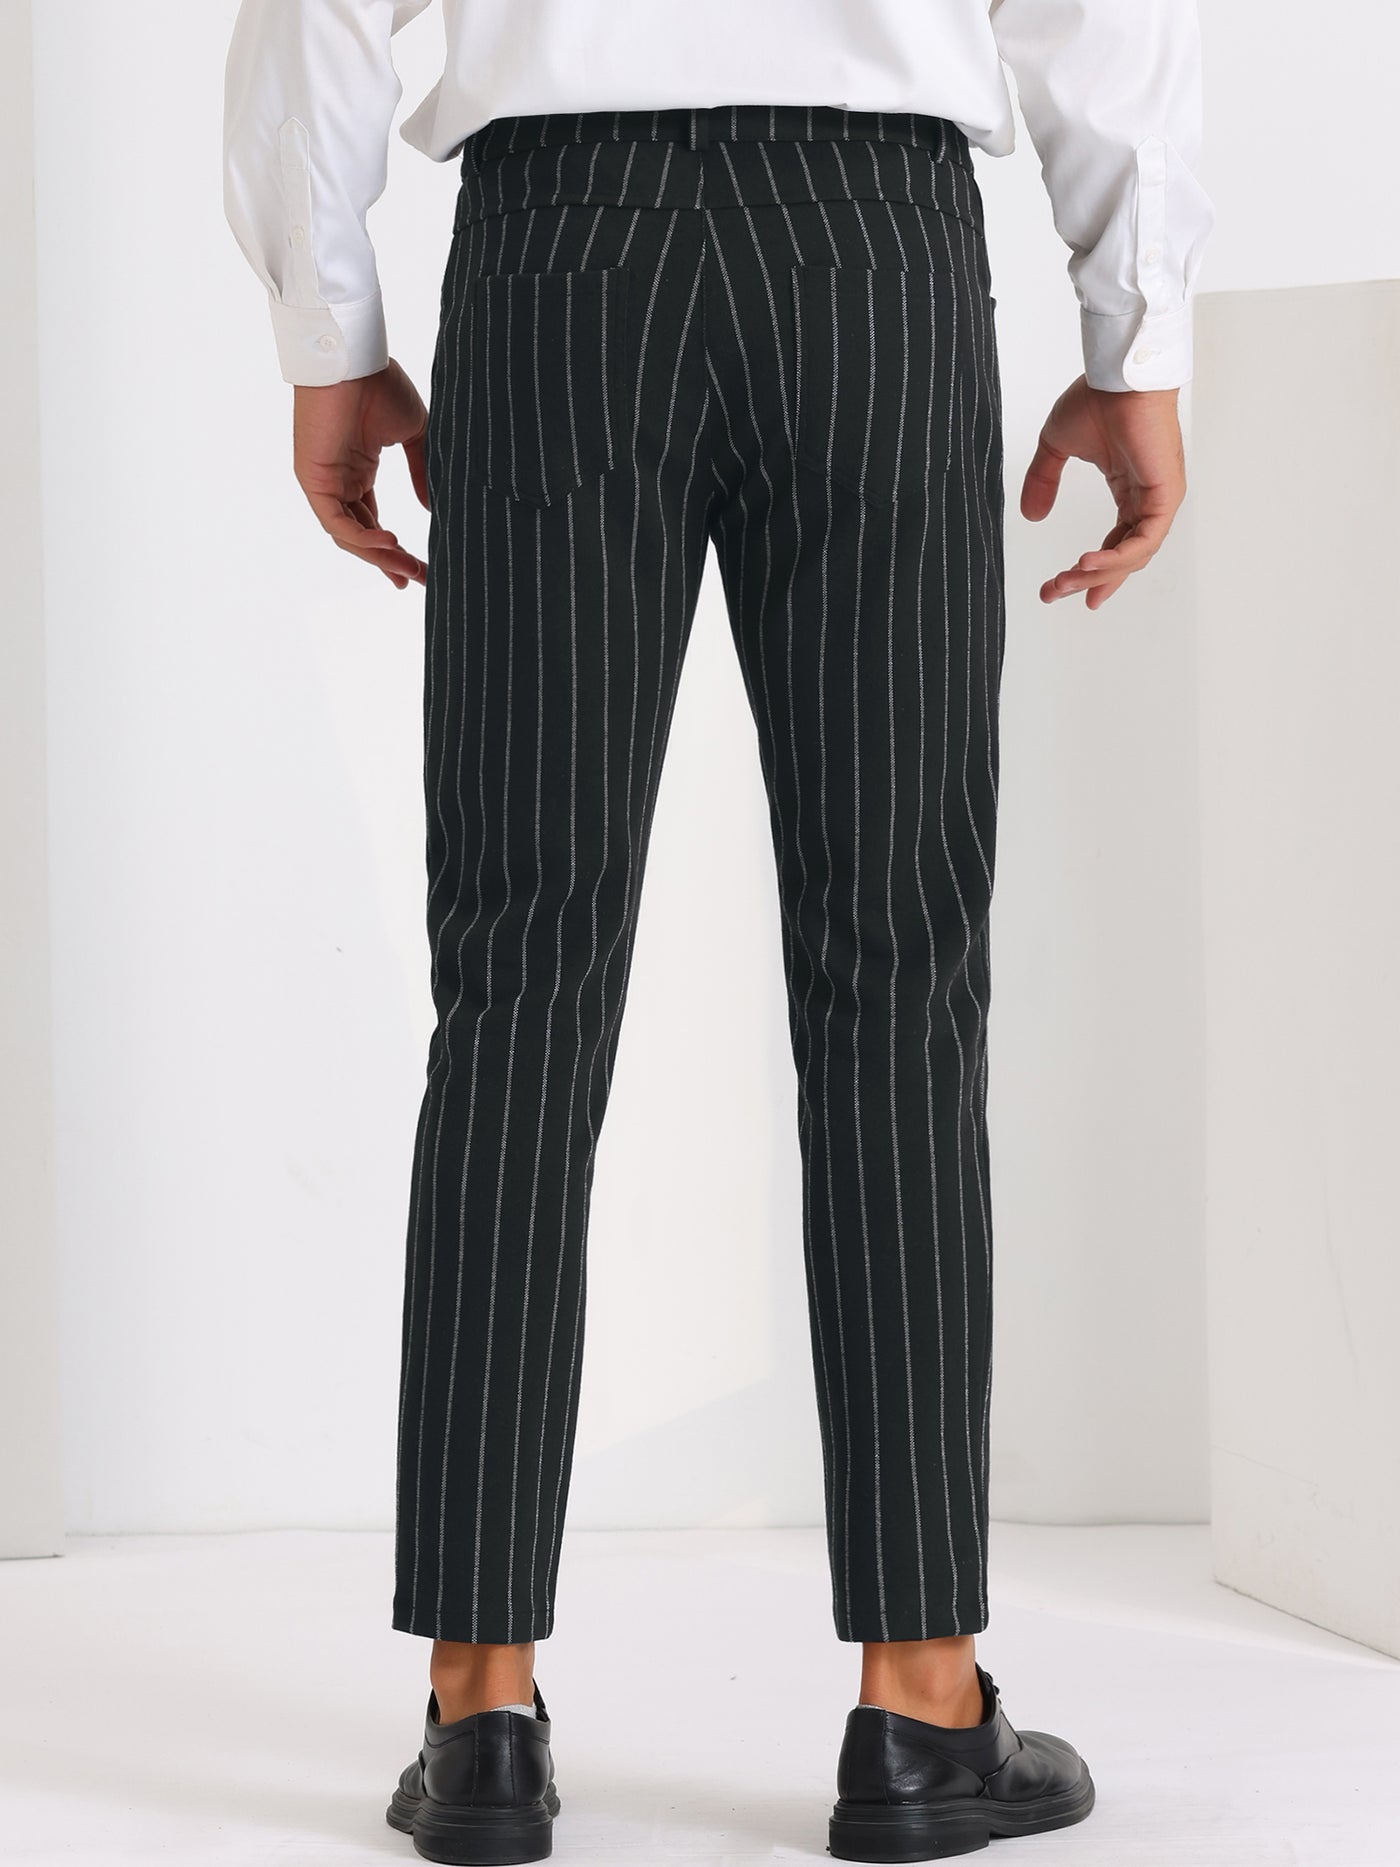 Bublédon Striped Pants for Men's Skinny Flat Front Business Chino Trousers